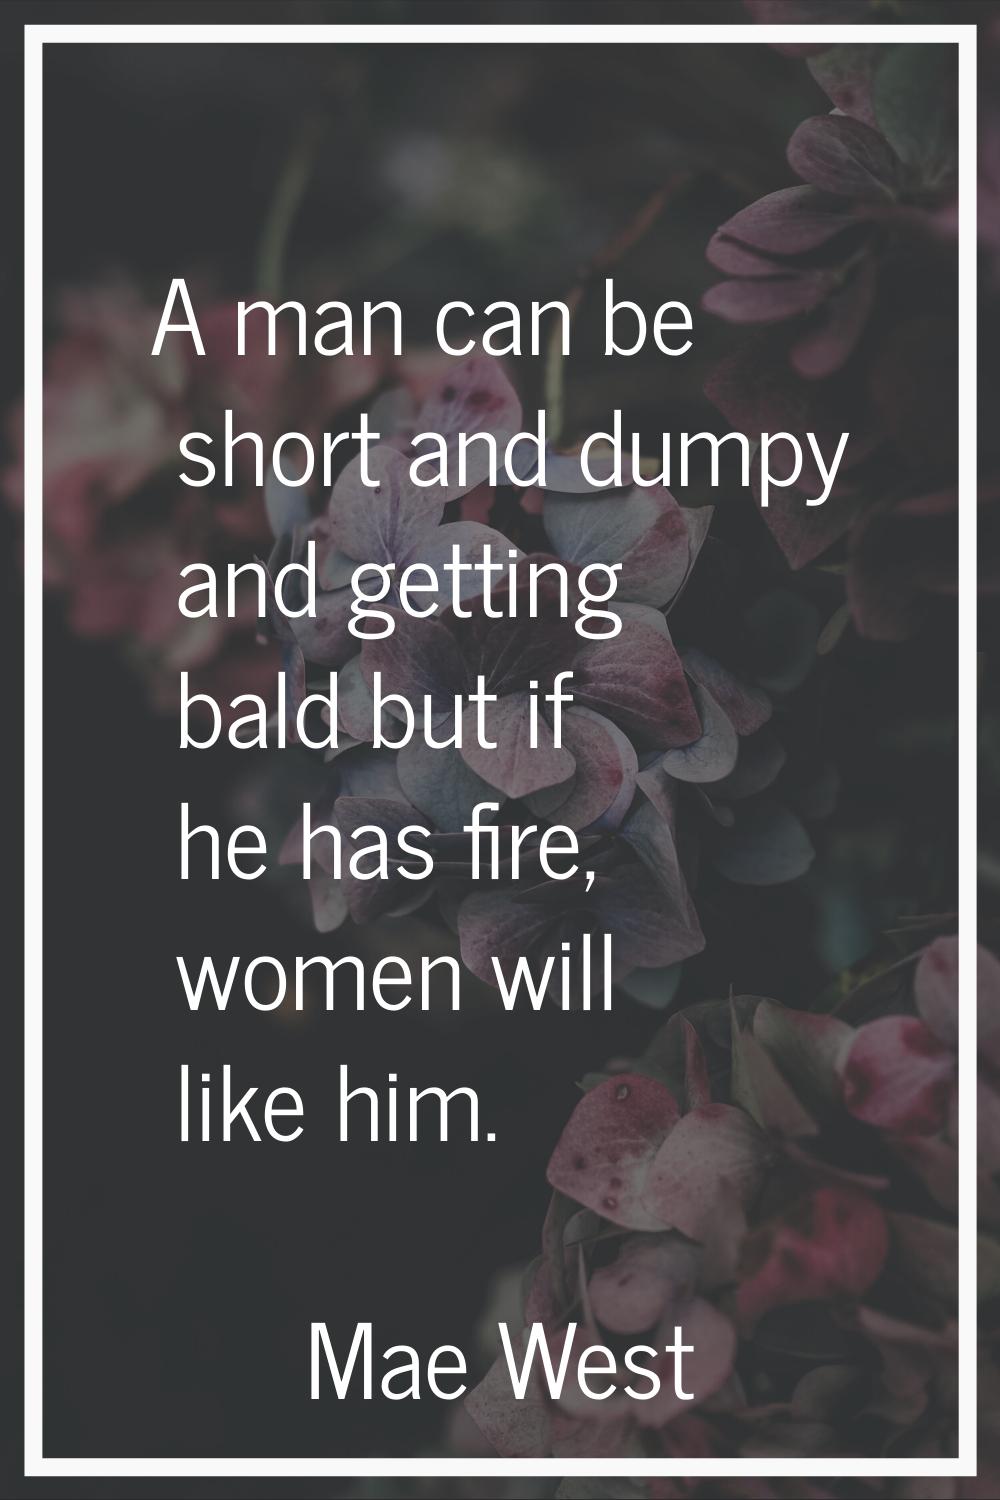 A man can be short and dumpy and getting bald but if he has fire, women will like him.